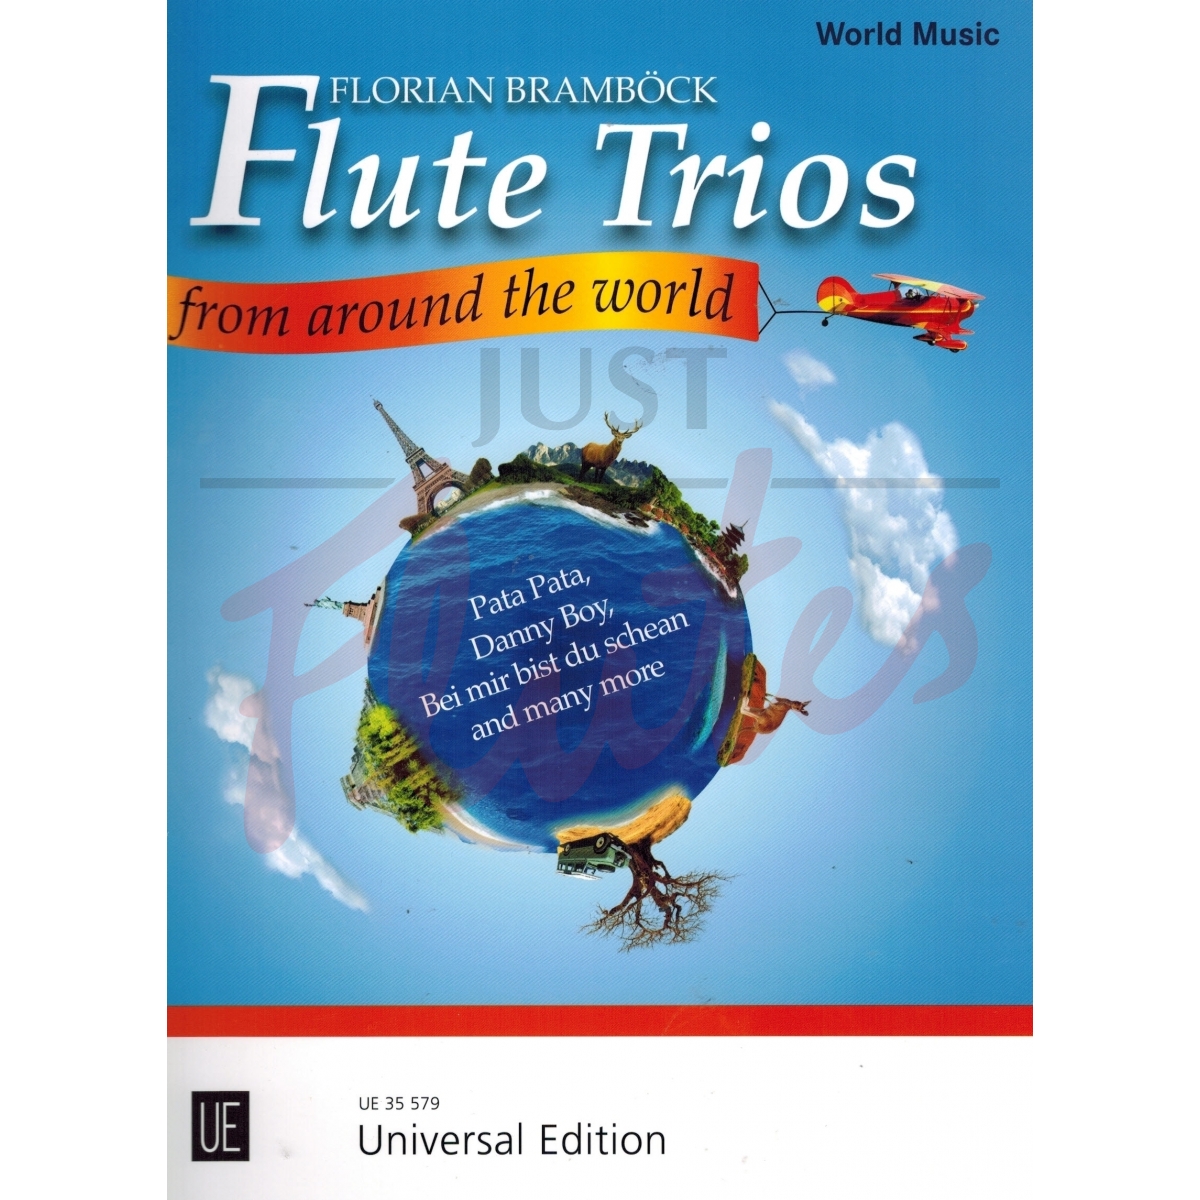 Flute Trios From Around the World